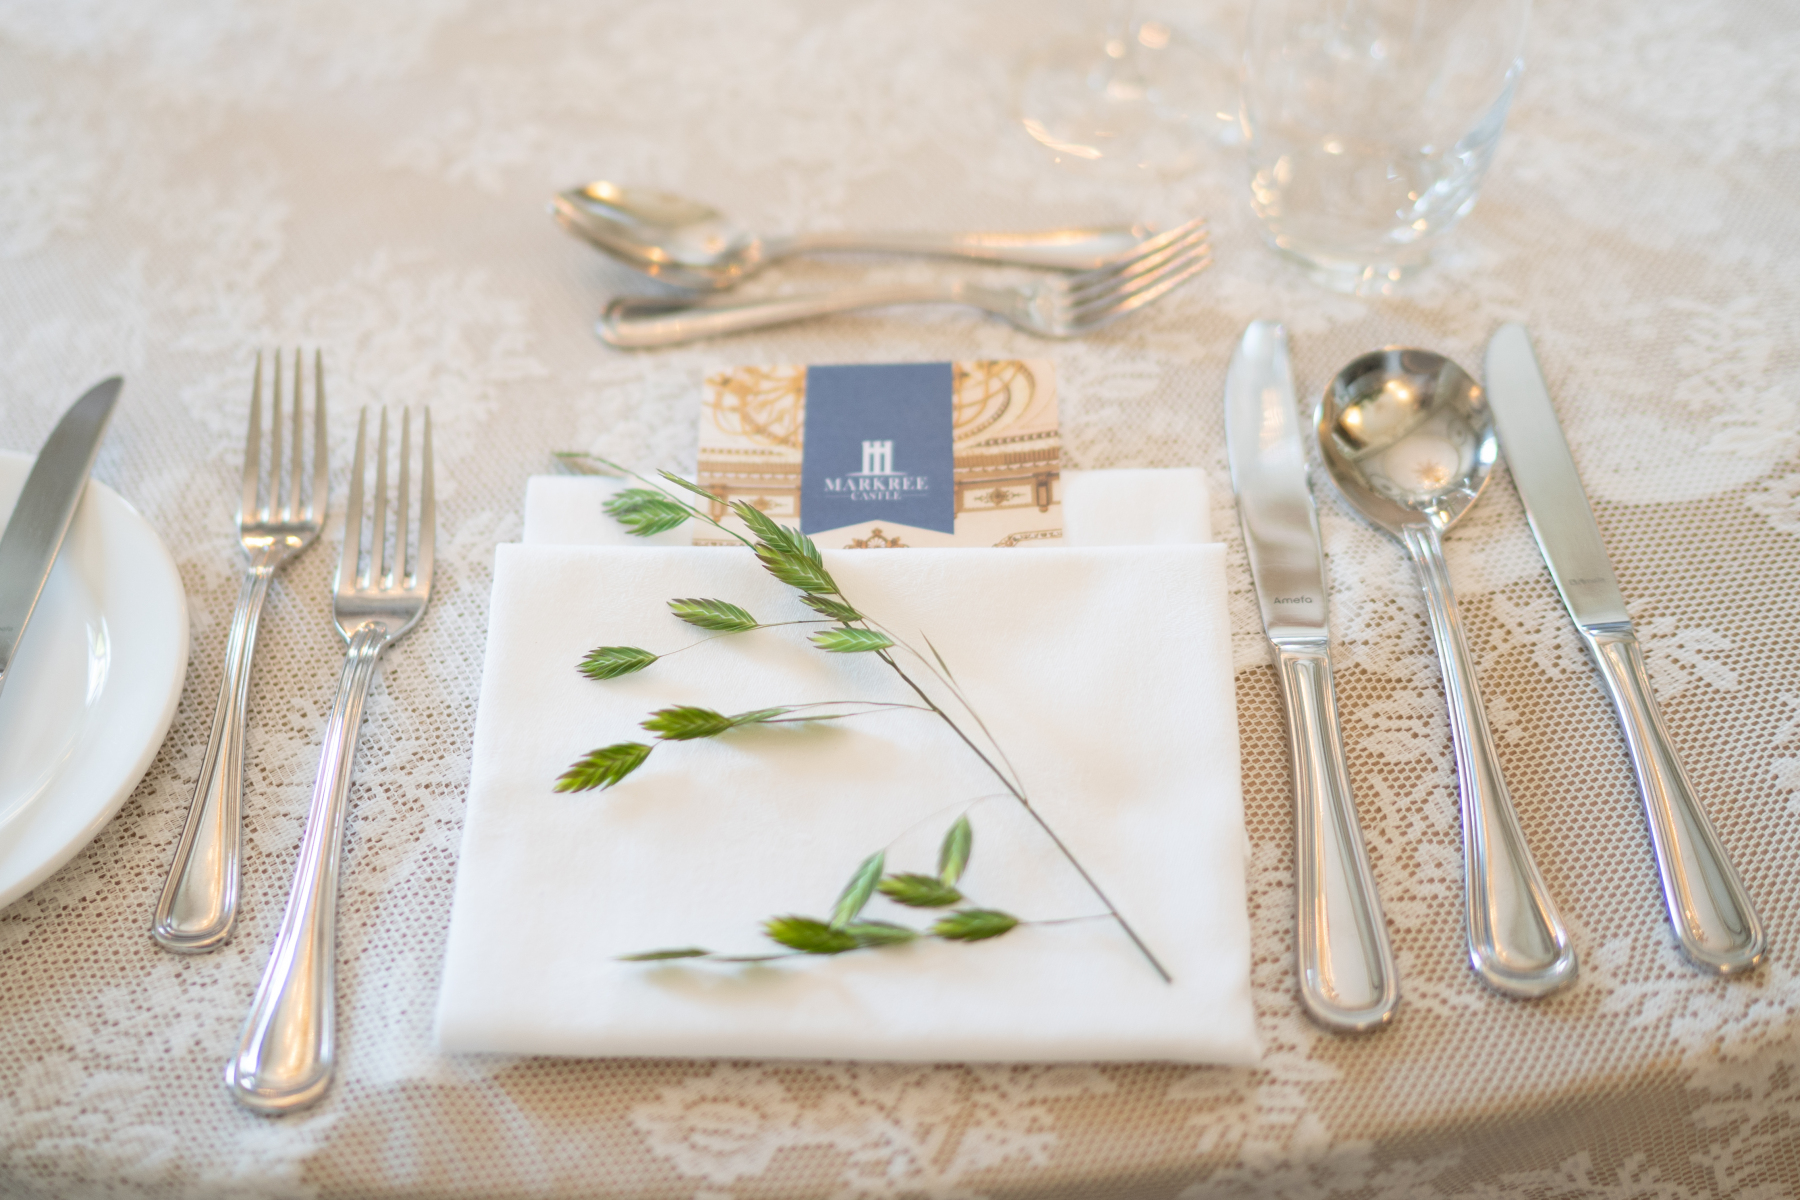 An example of a venue's offerings -- make sure it matches your wedding style and vibe!